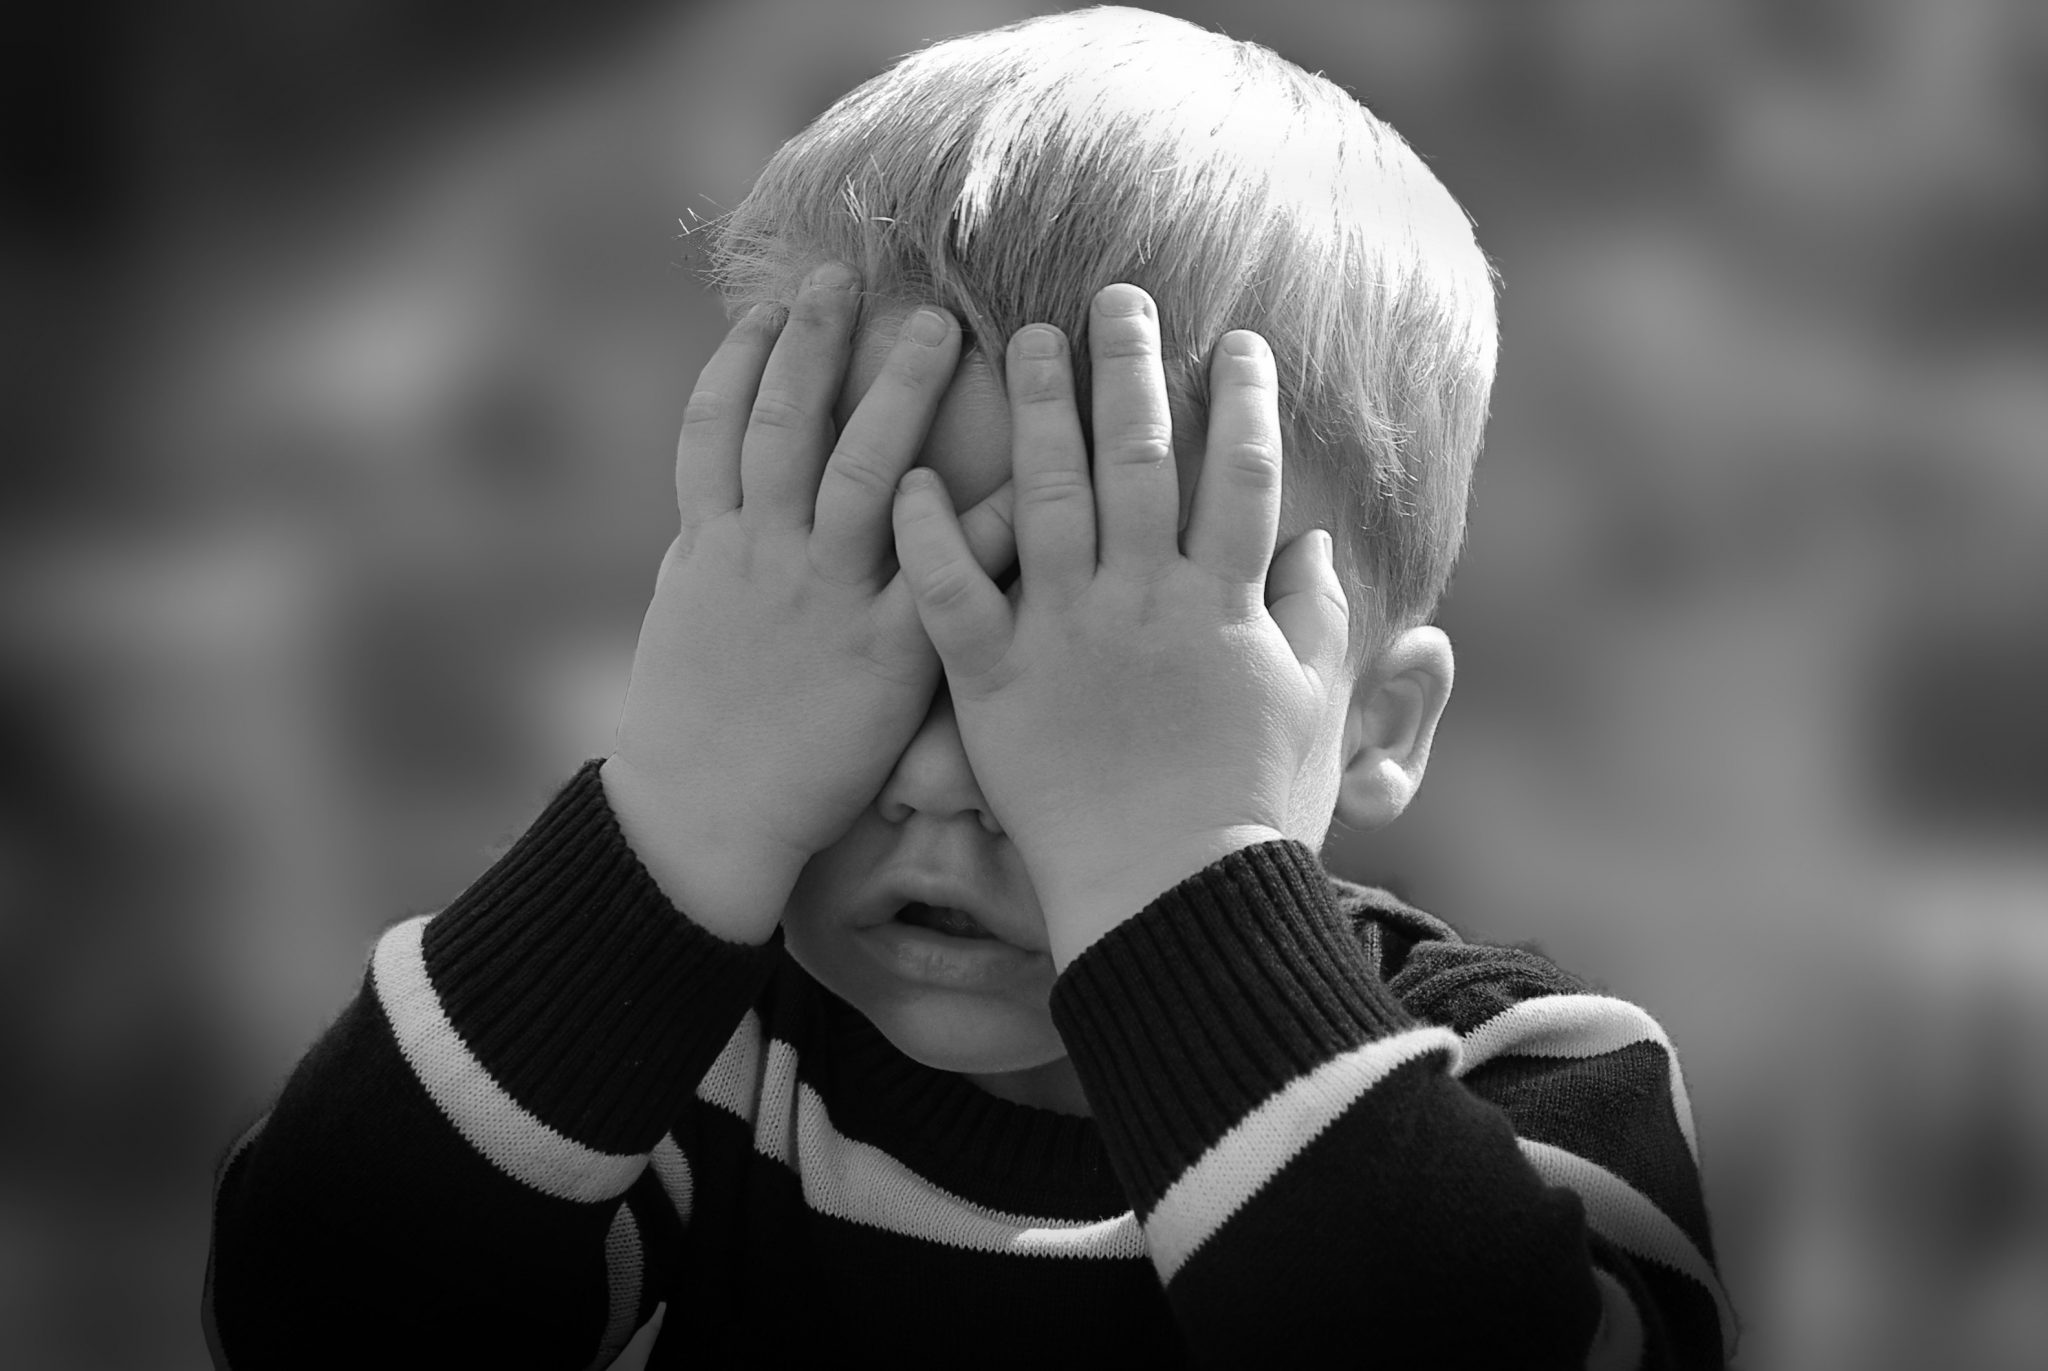 Photograph of a young boy covering his face